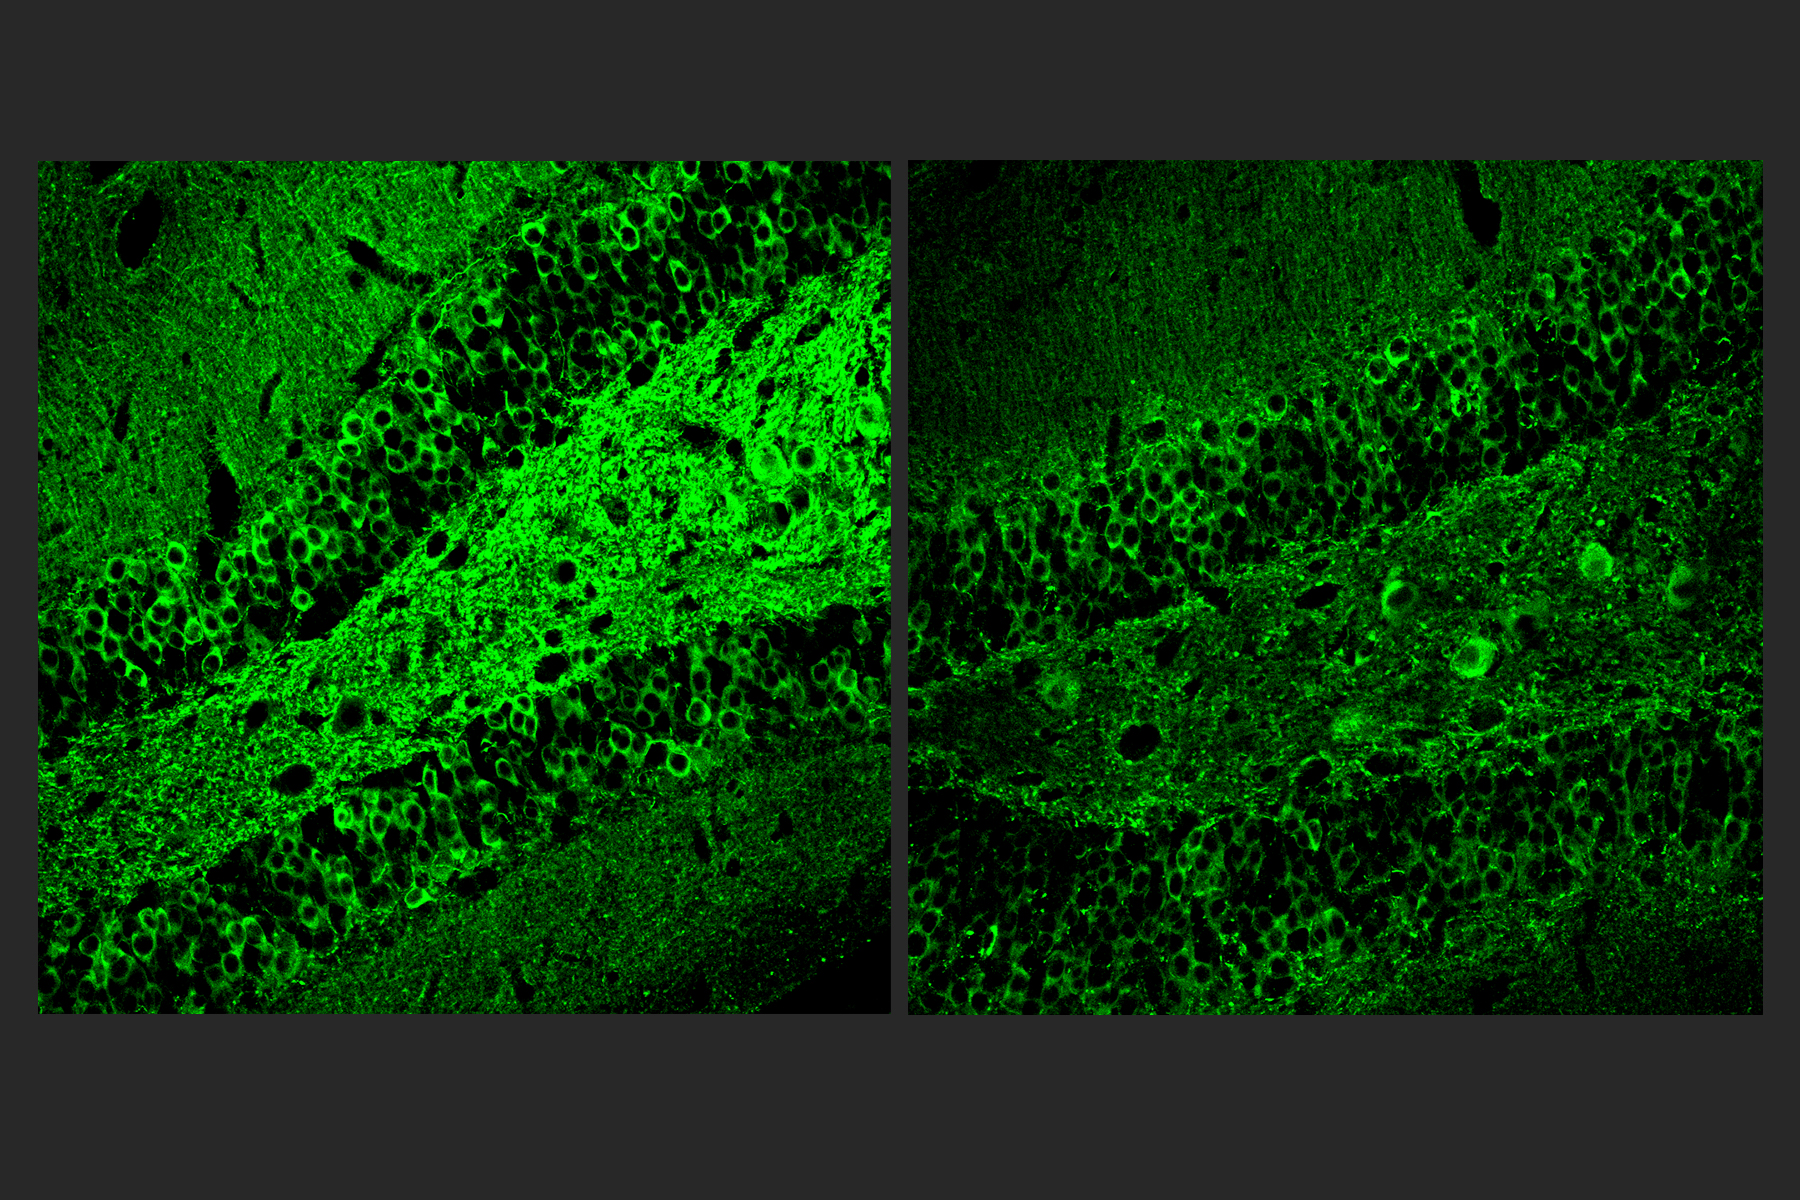 Two square panels side by side show brain tissue with green staining. The panel on the left shows much more green than the panel on the right.